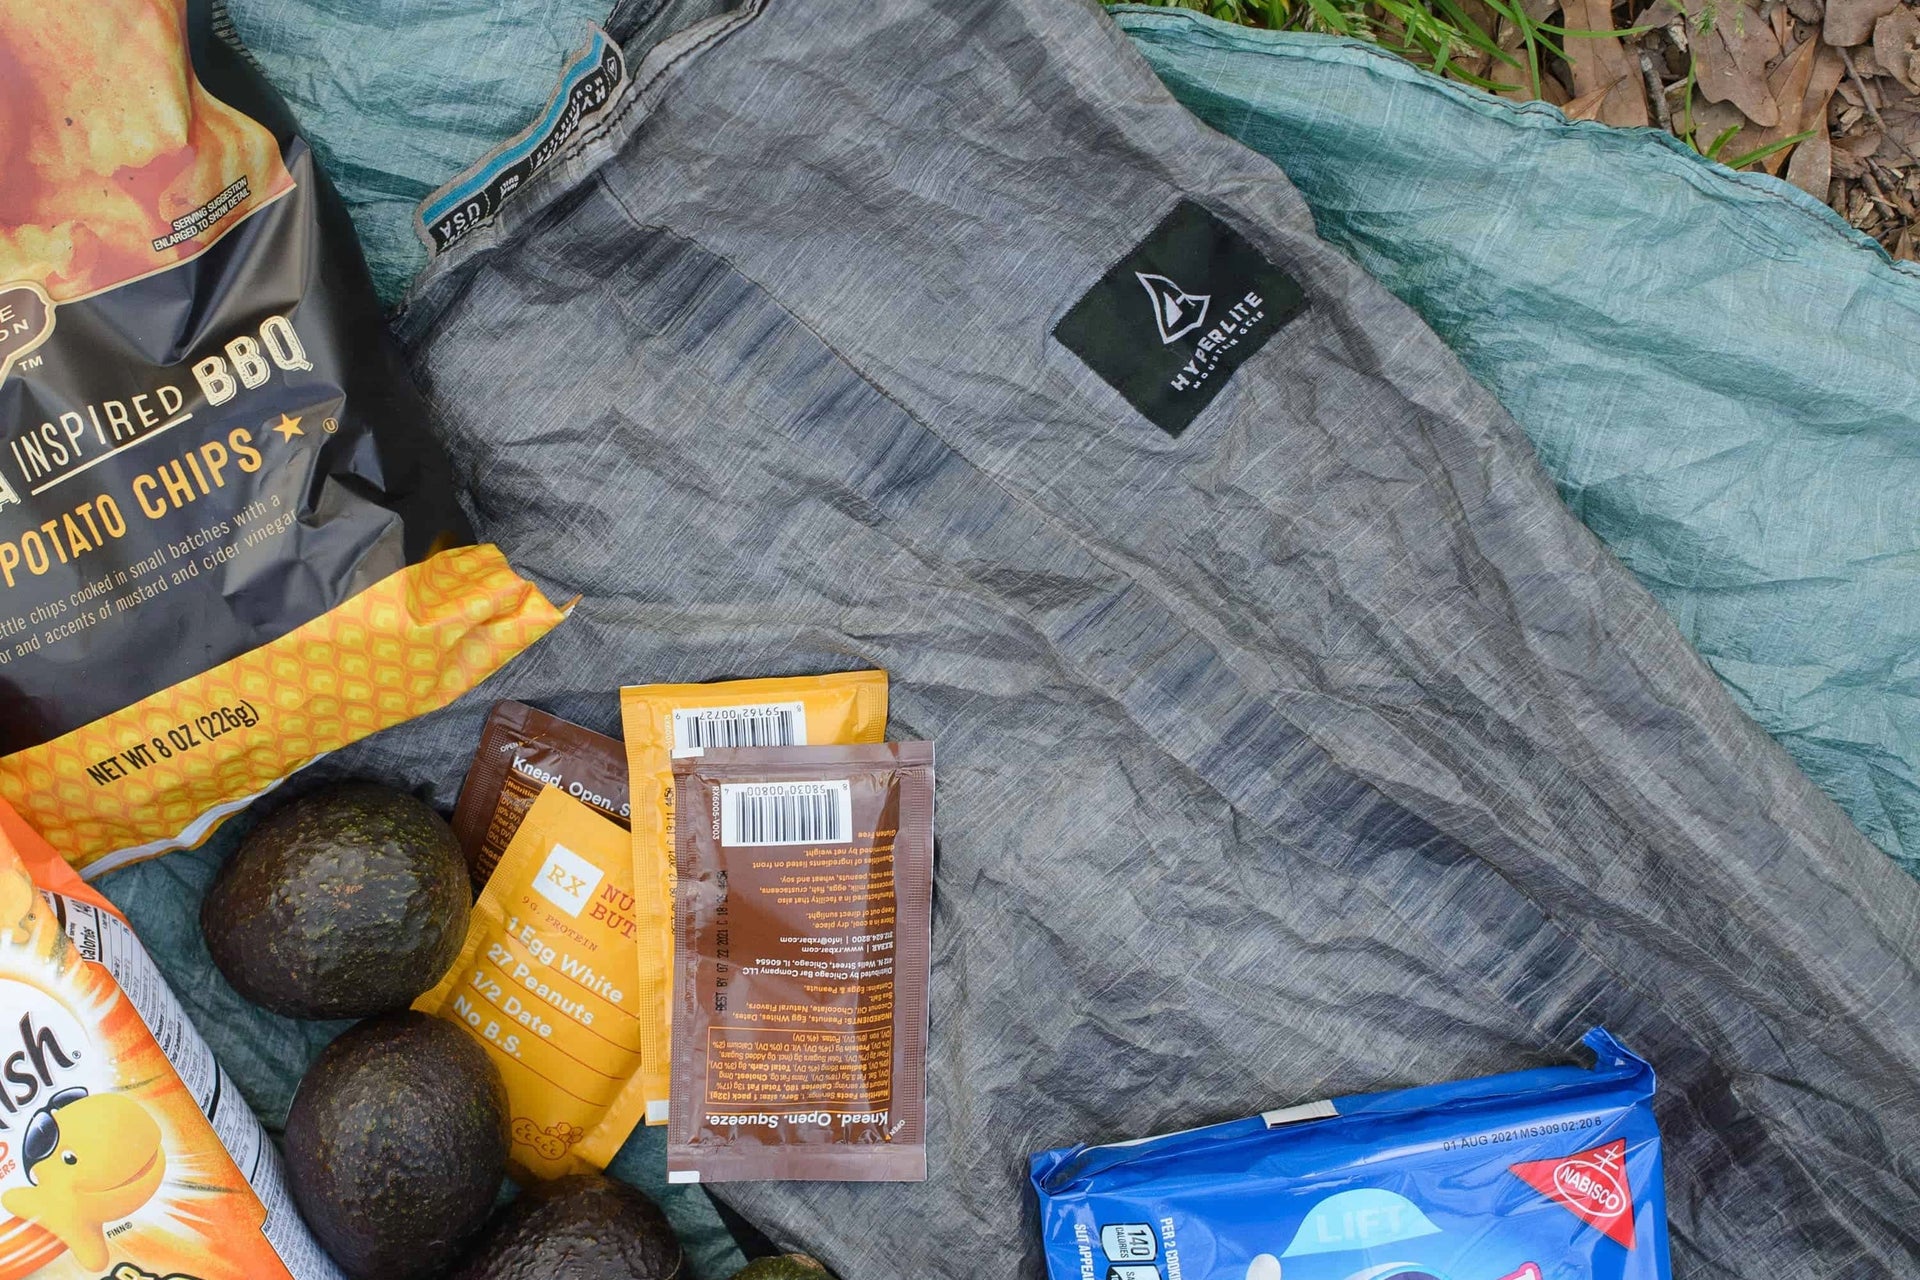 A sleeping bag, snacks, and other items are laid out on the ground.